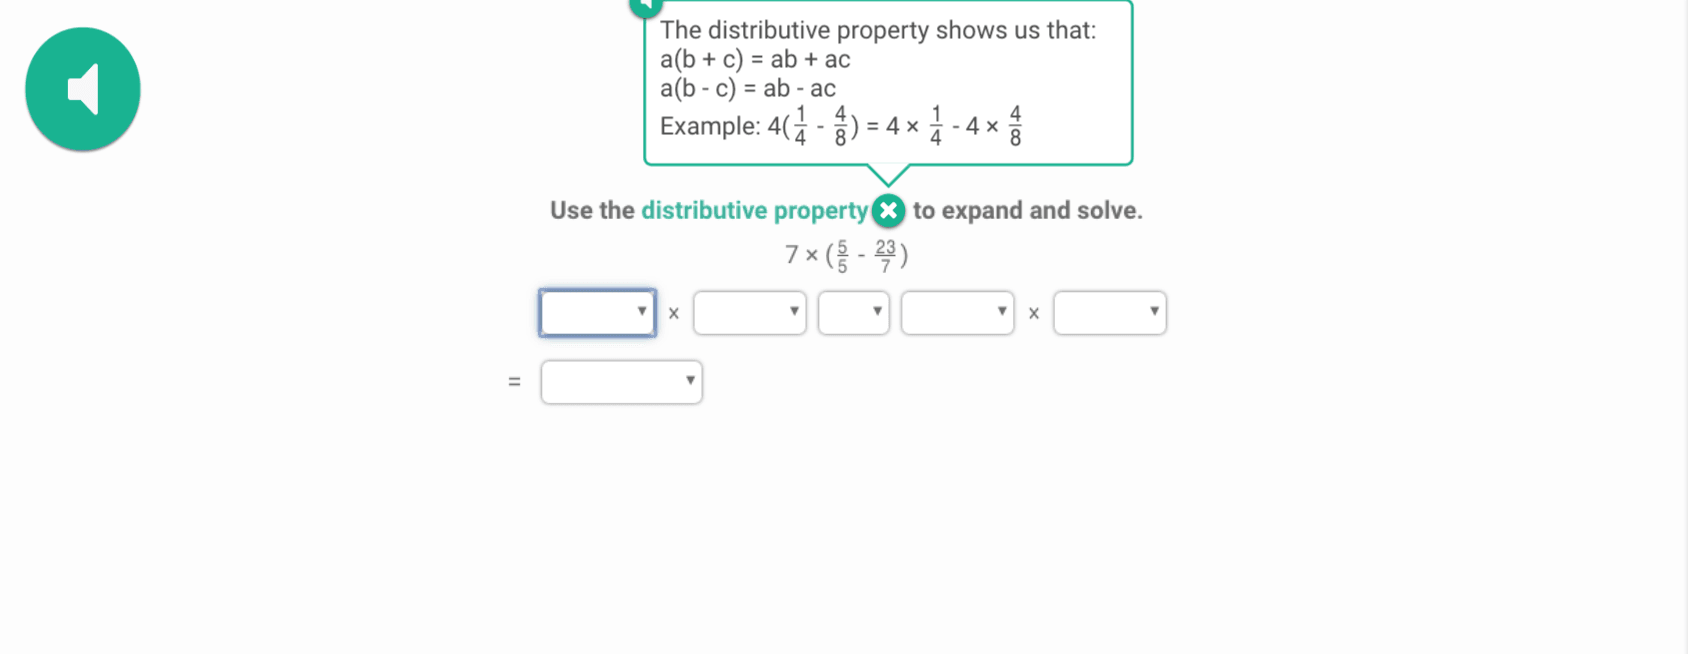 Exploring distributive property in Prodigy